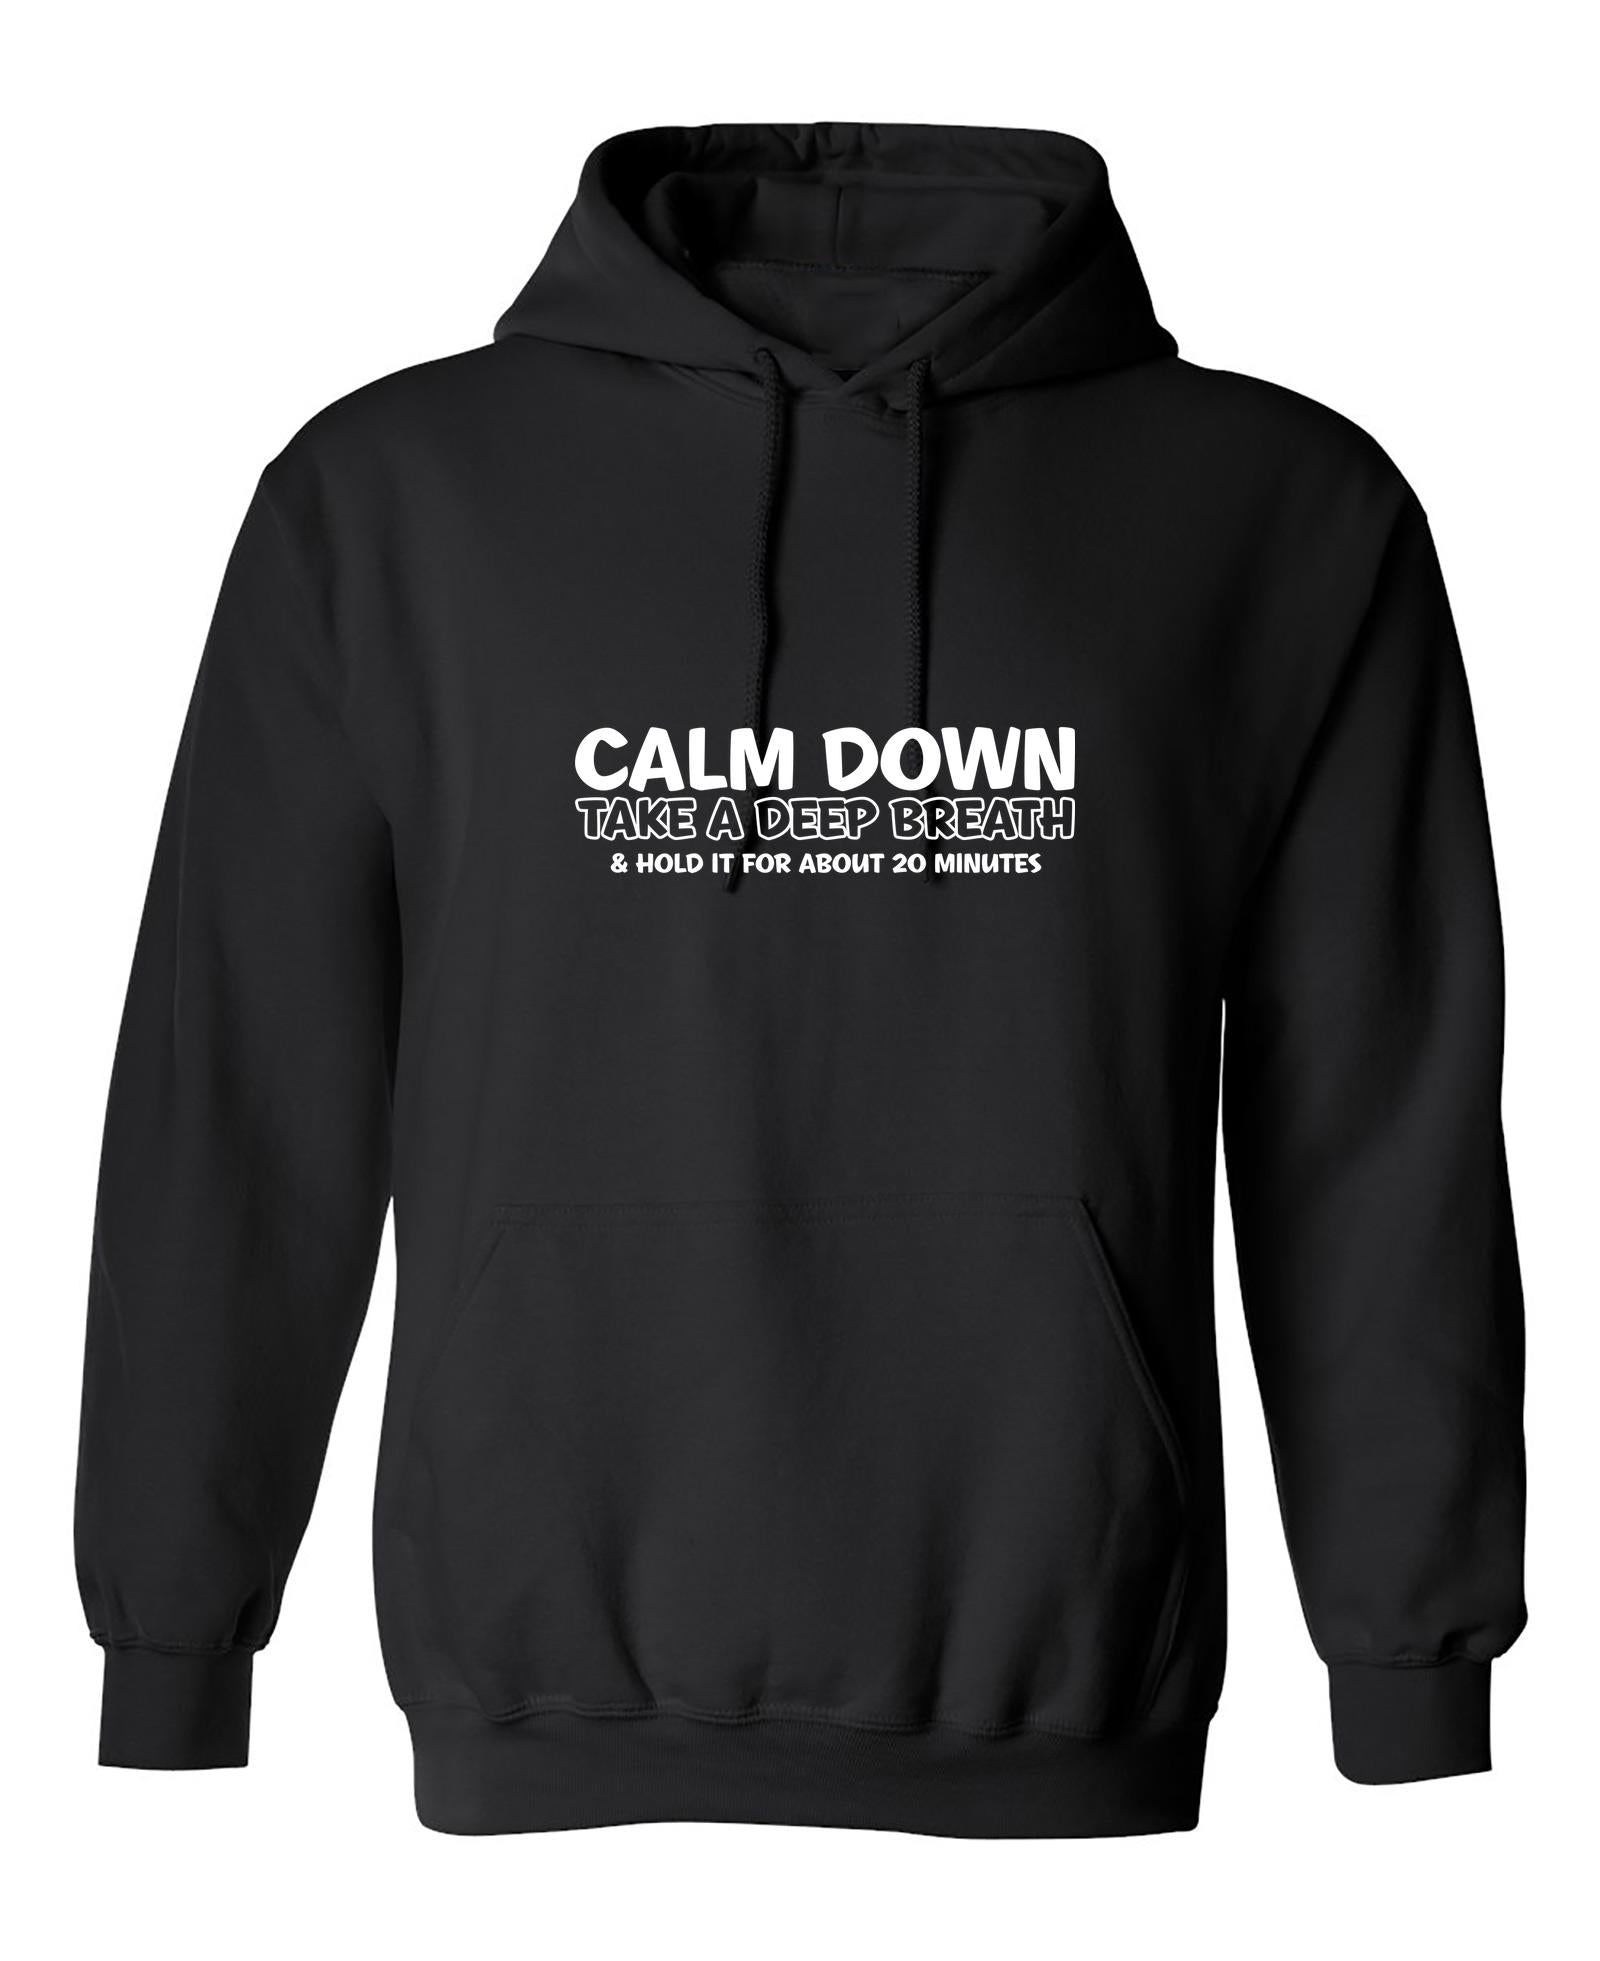 Funny T-Shirts design "Calm Down Take A Deep Breath & Hold It For About 20 Minutes"